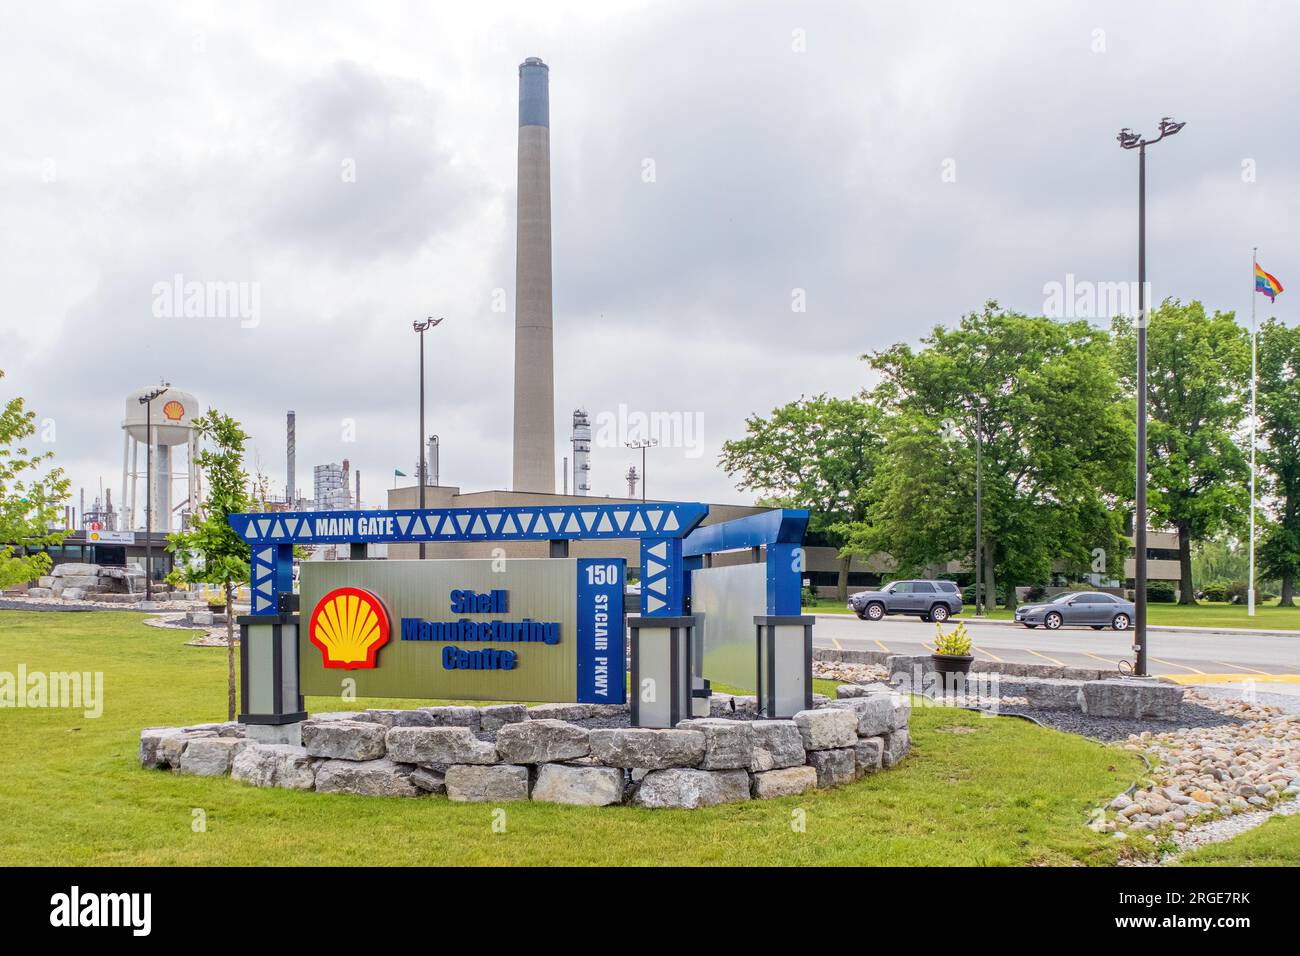 Sign at the main gate of the Shell Manufacturing Centre in Sarnia Ontario. Stock Photo